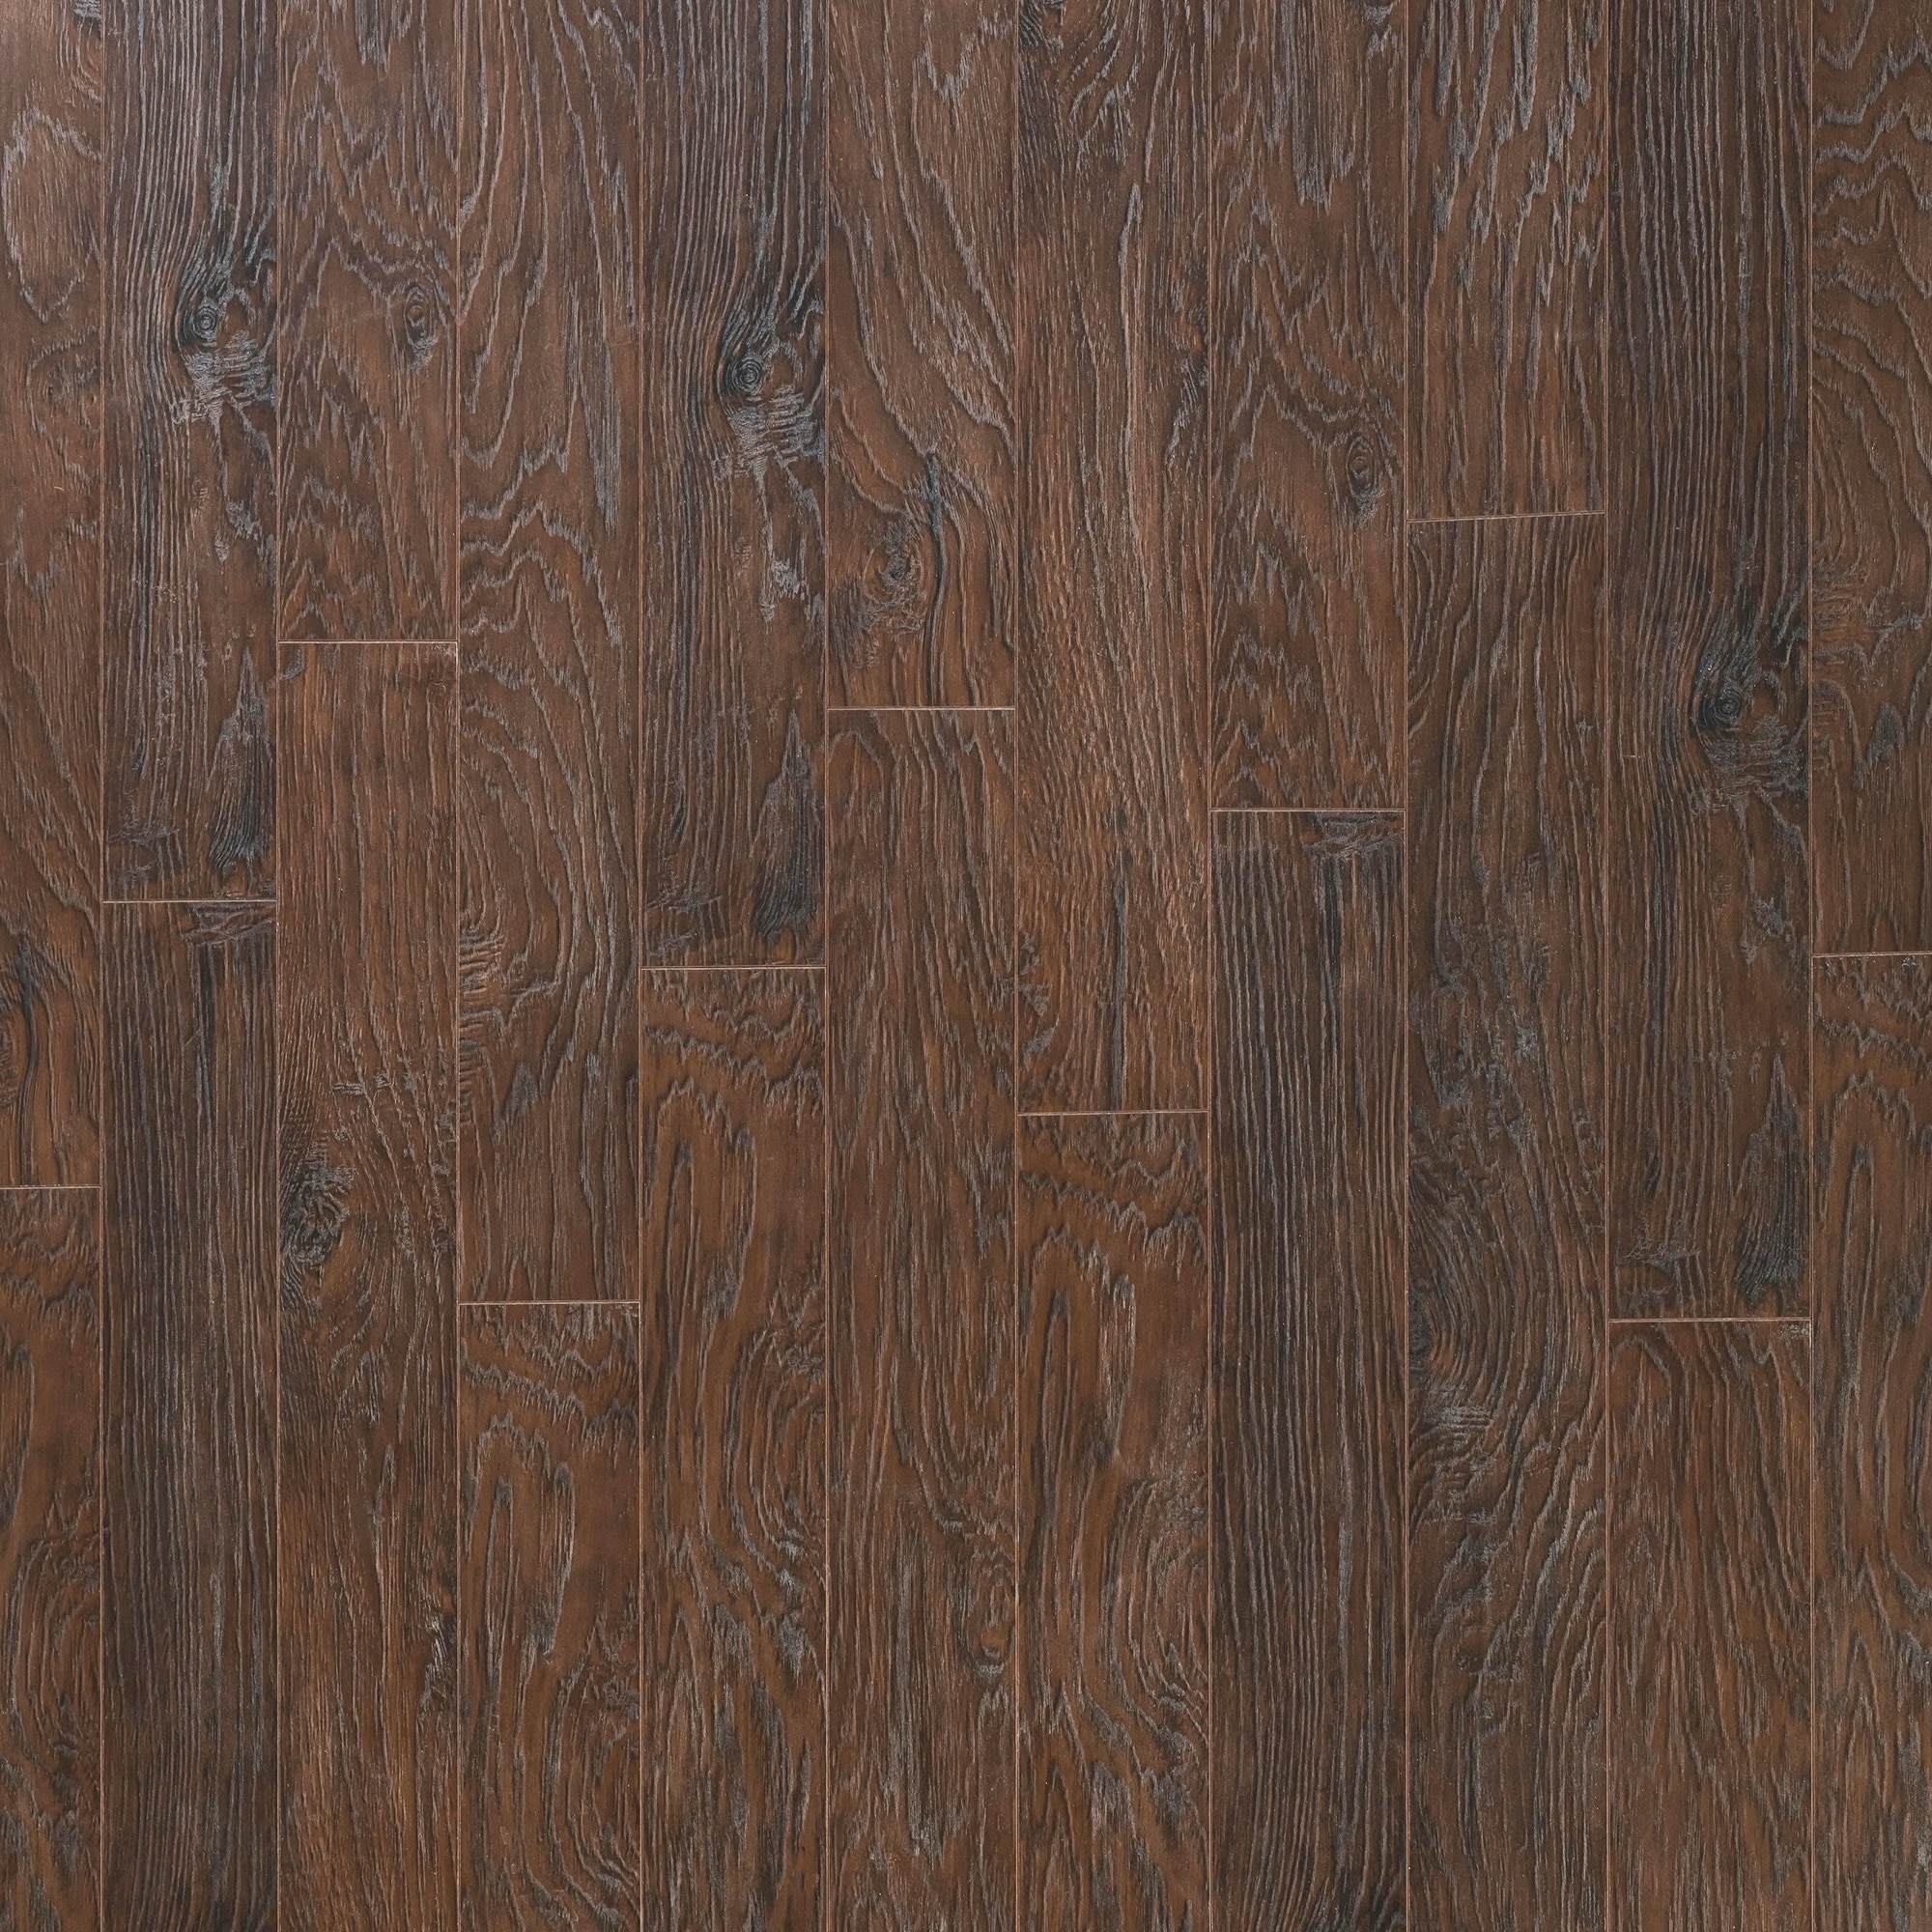 Pergo Classics Sed Hickory 10 Mm T X 5 In W 48 L Water Resistant Wood Plank Laminate Flooring The Department At Lowes Com